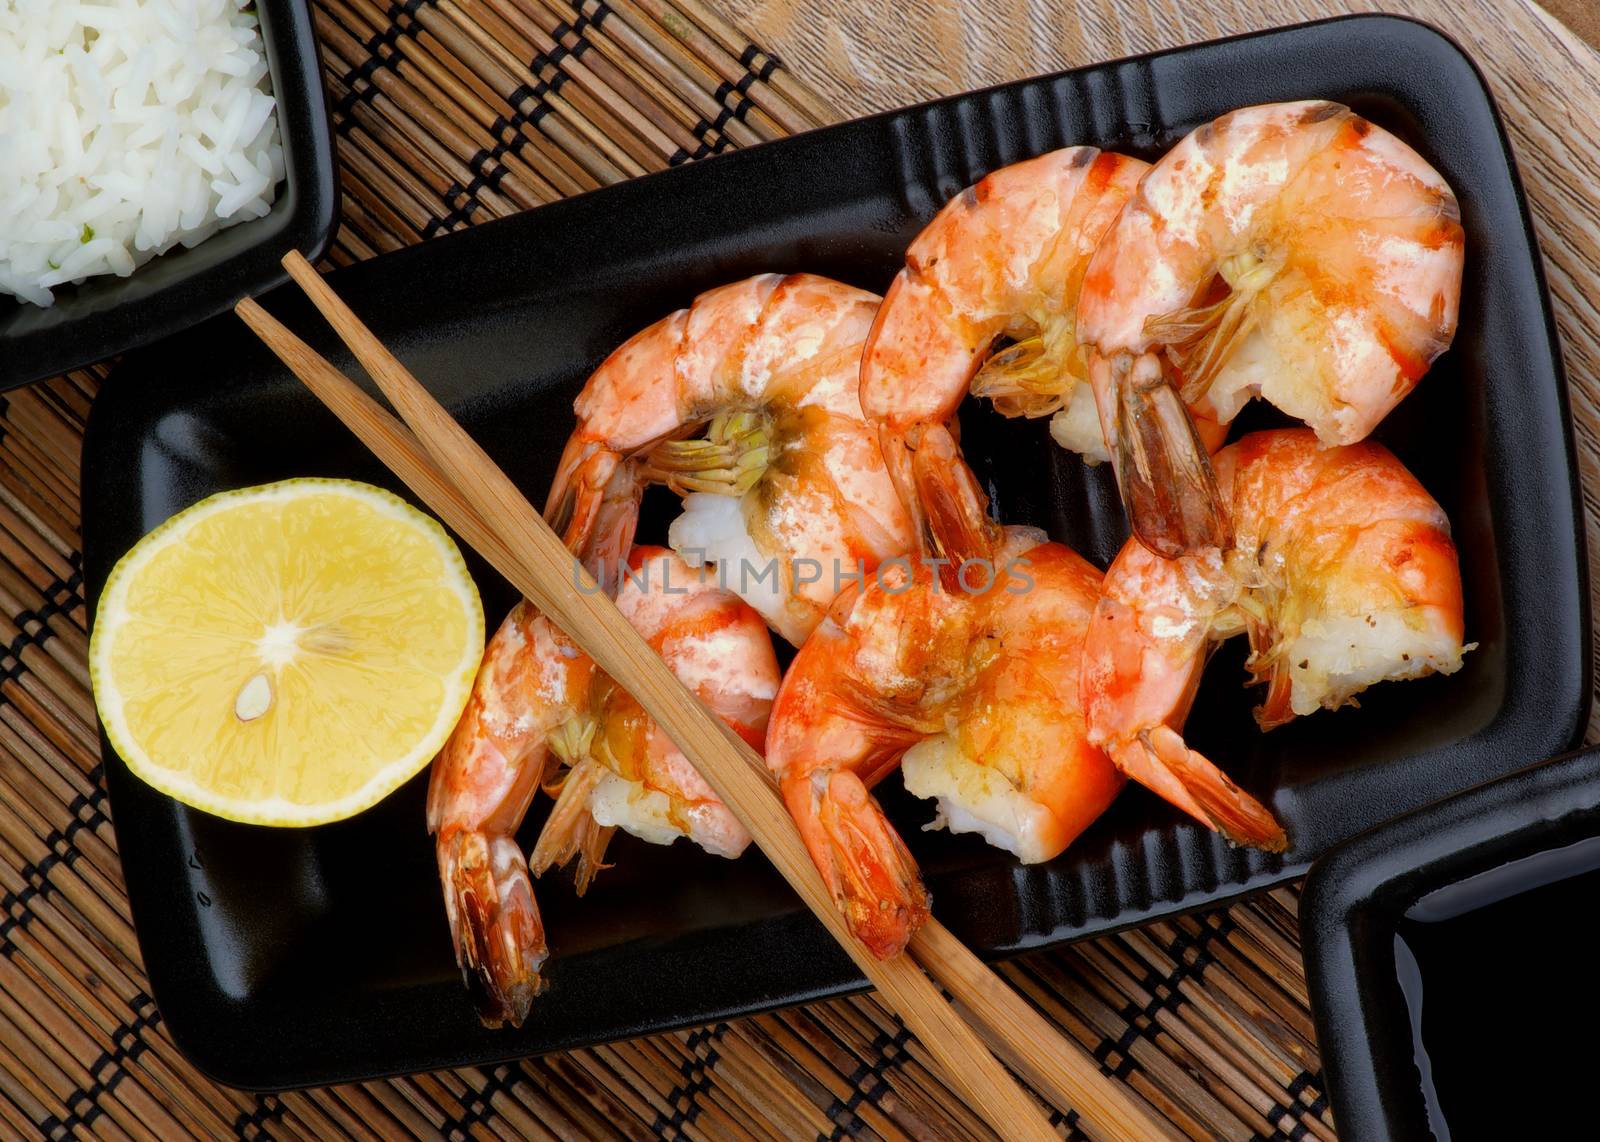 Roasted Shrimps with Lemon and Chopsticks, Soy Sauce and Boiled Rice in Square Bowls on Straw Mat background in Asian Style